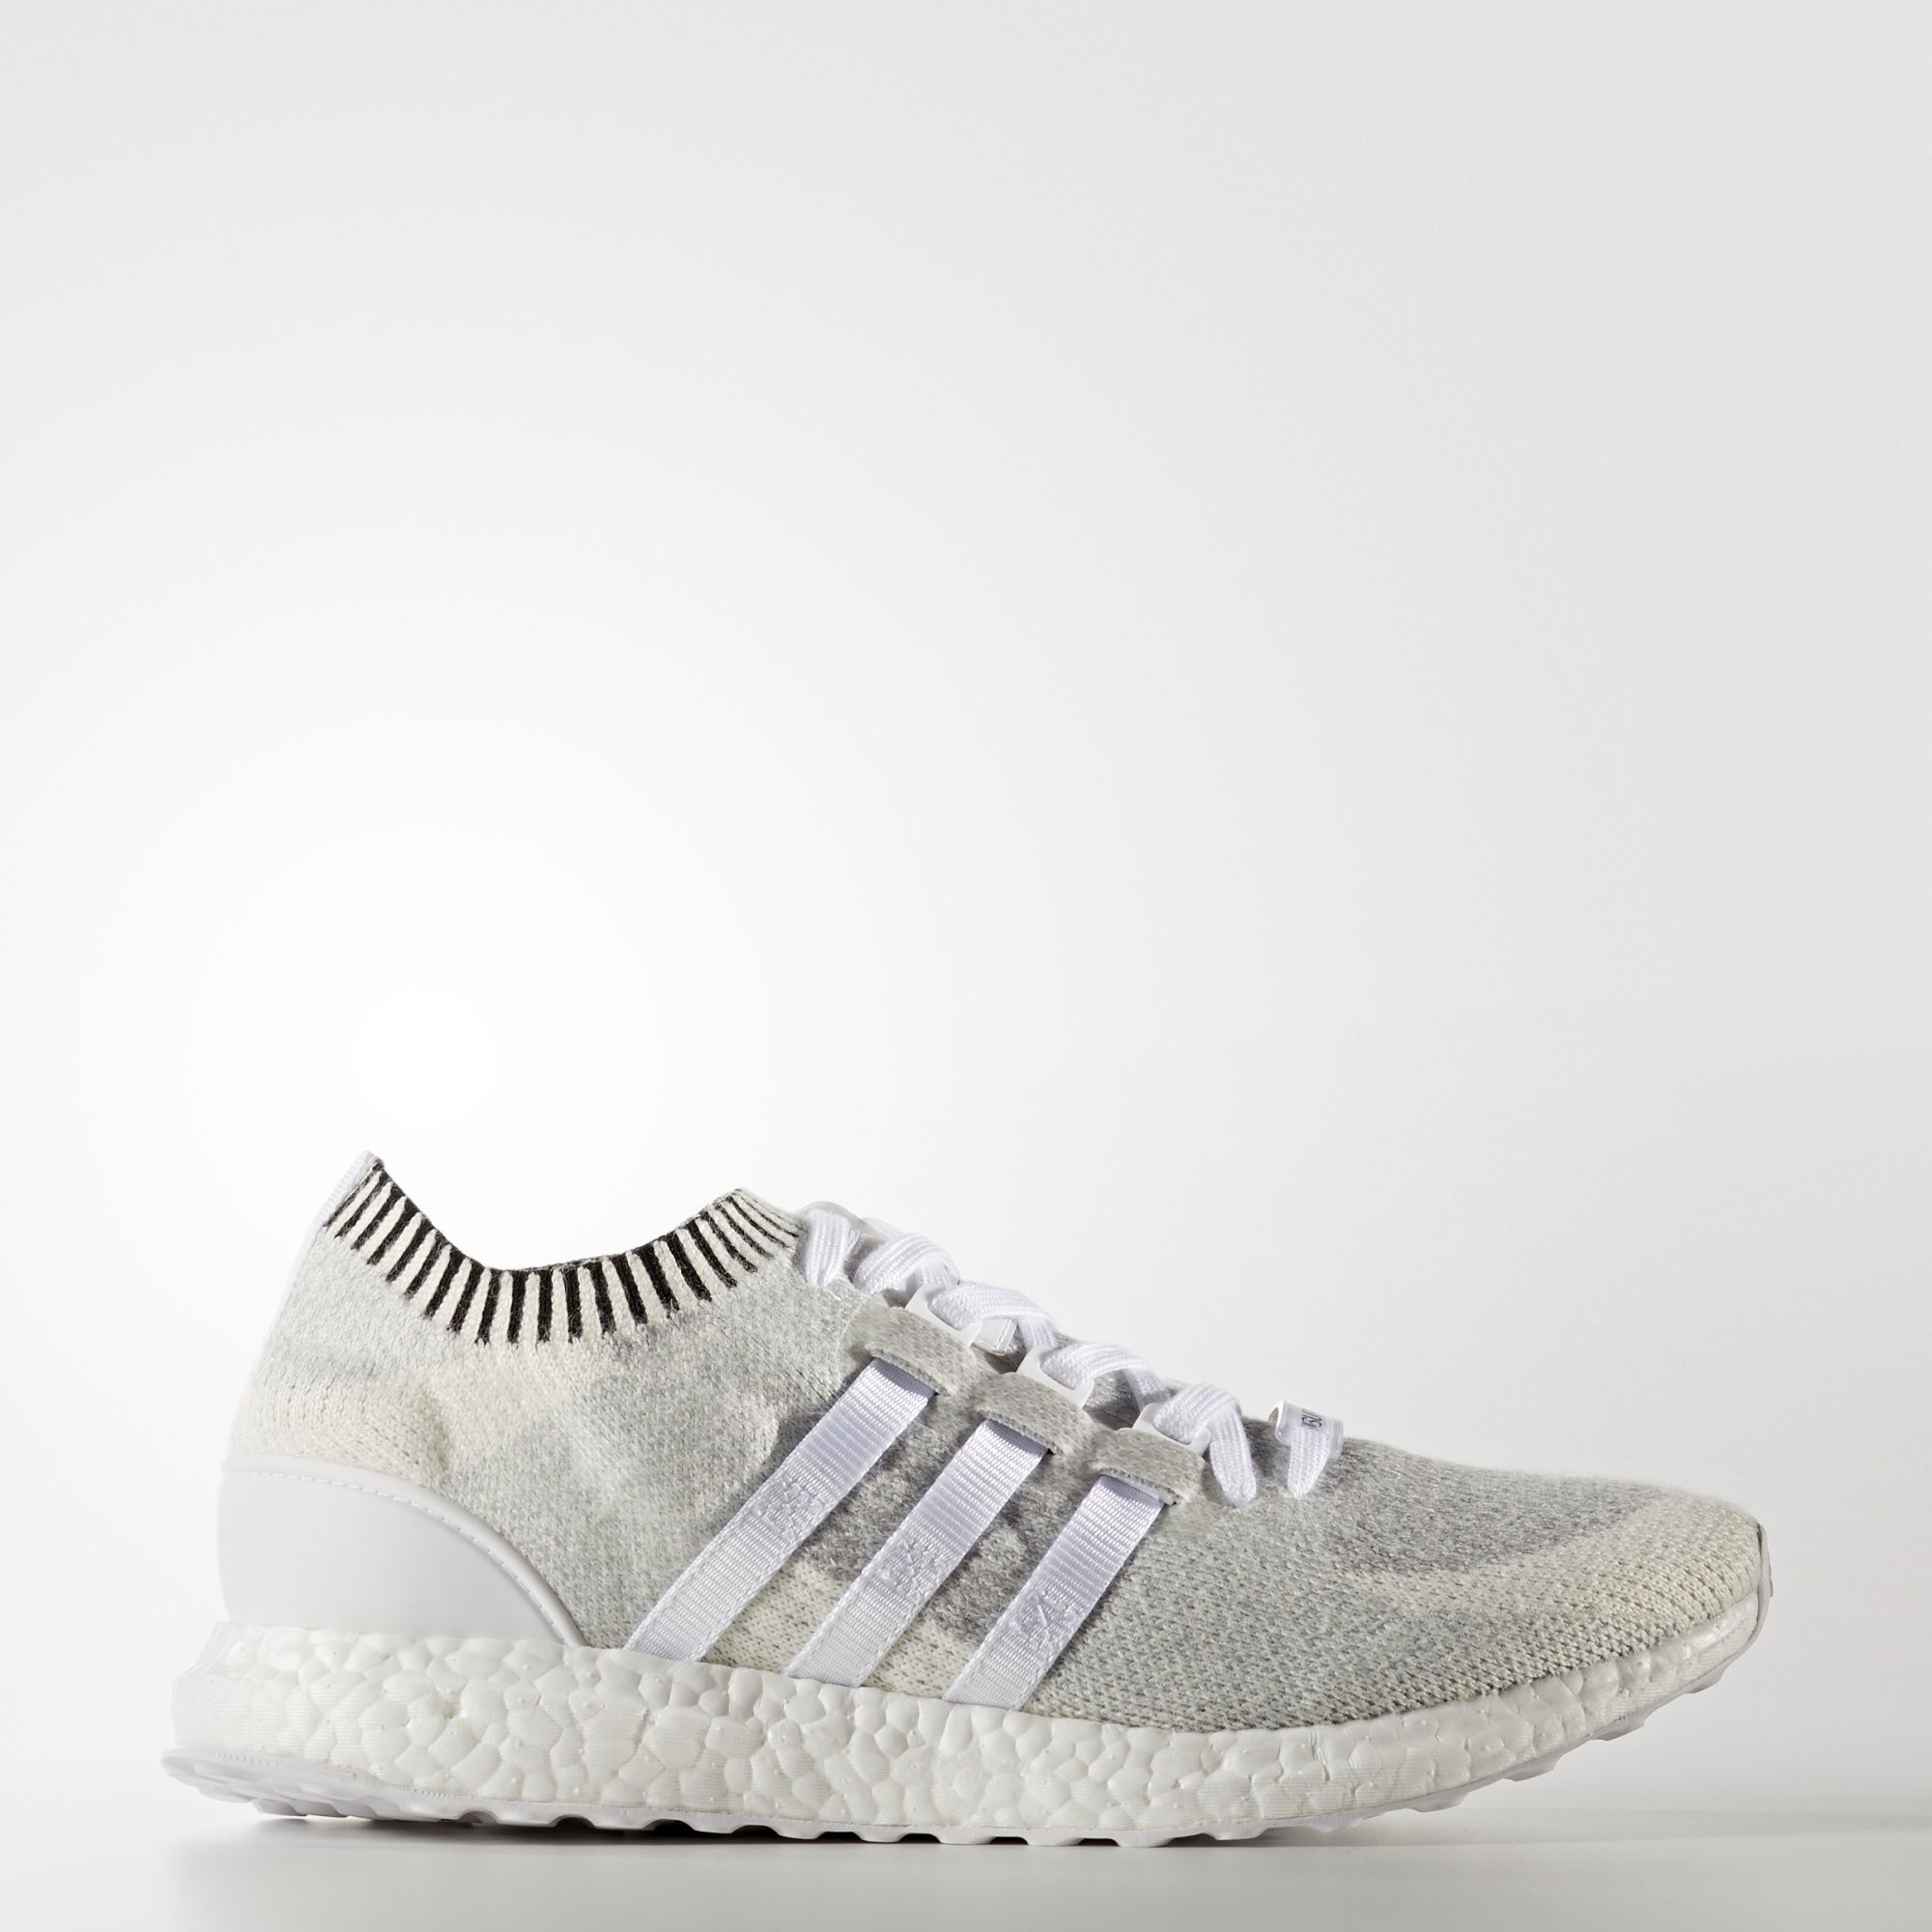 giay the thao cong nghe knit - adidas Originals EQT Support Ultra - elle man 3